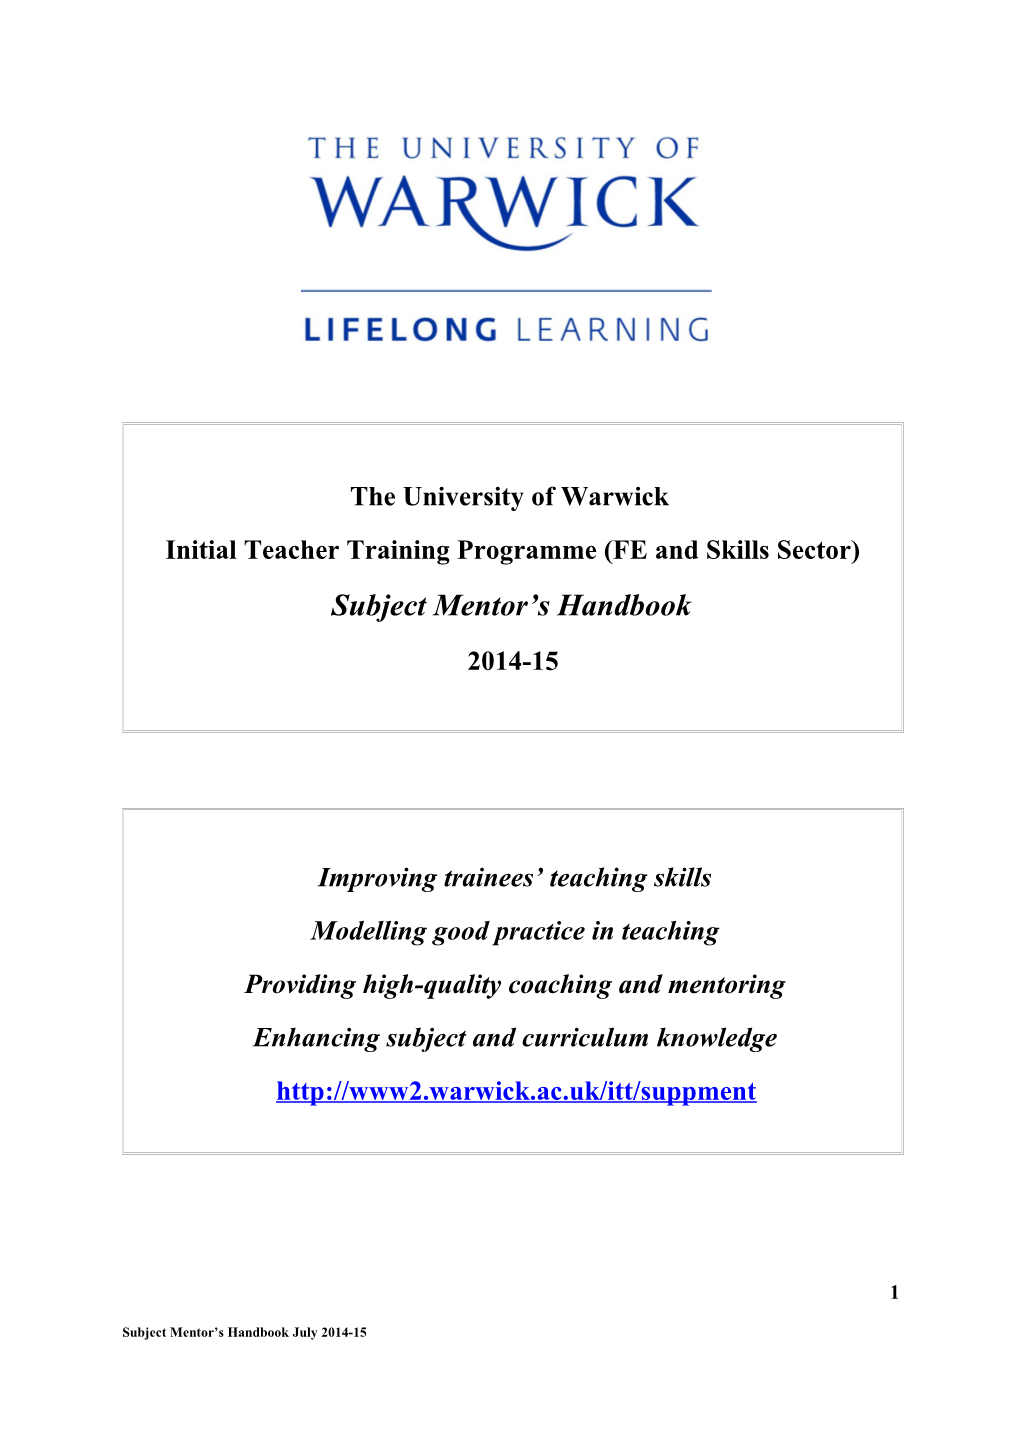 Initial Teacher Training Programme (FE and Skills Sector)